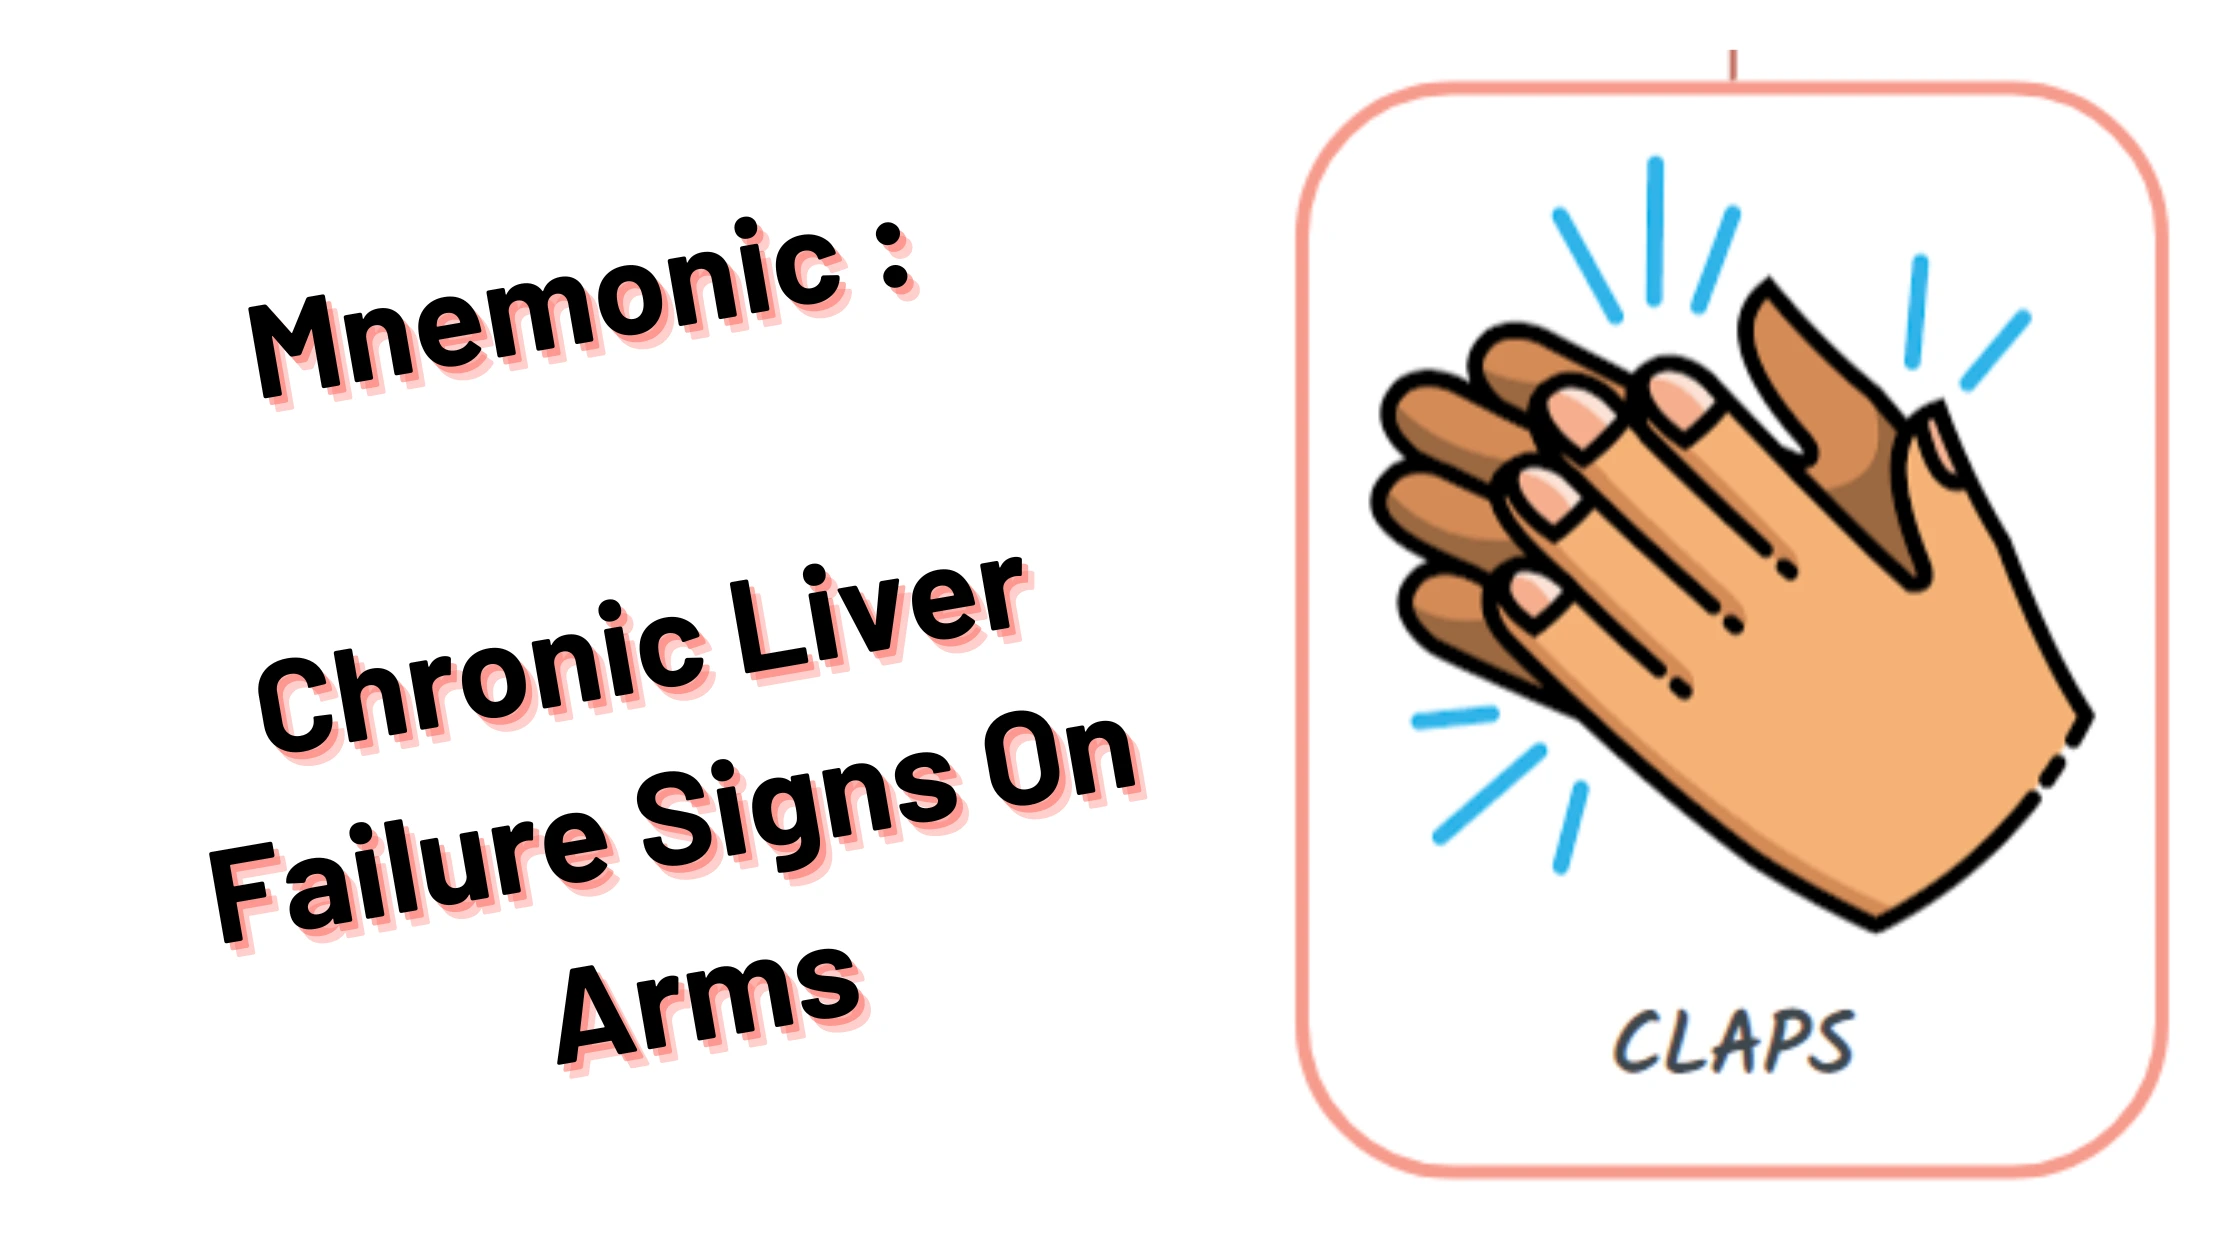 Mnemonic _ Chronic Liver Failure Signs On Arms